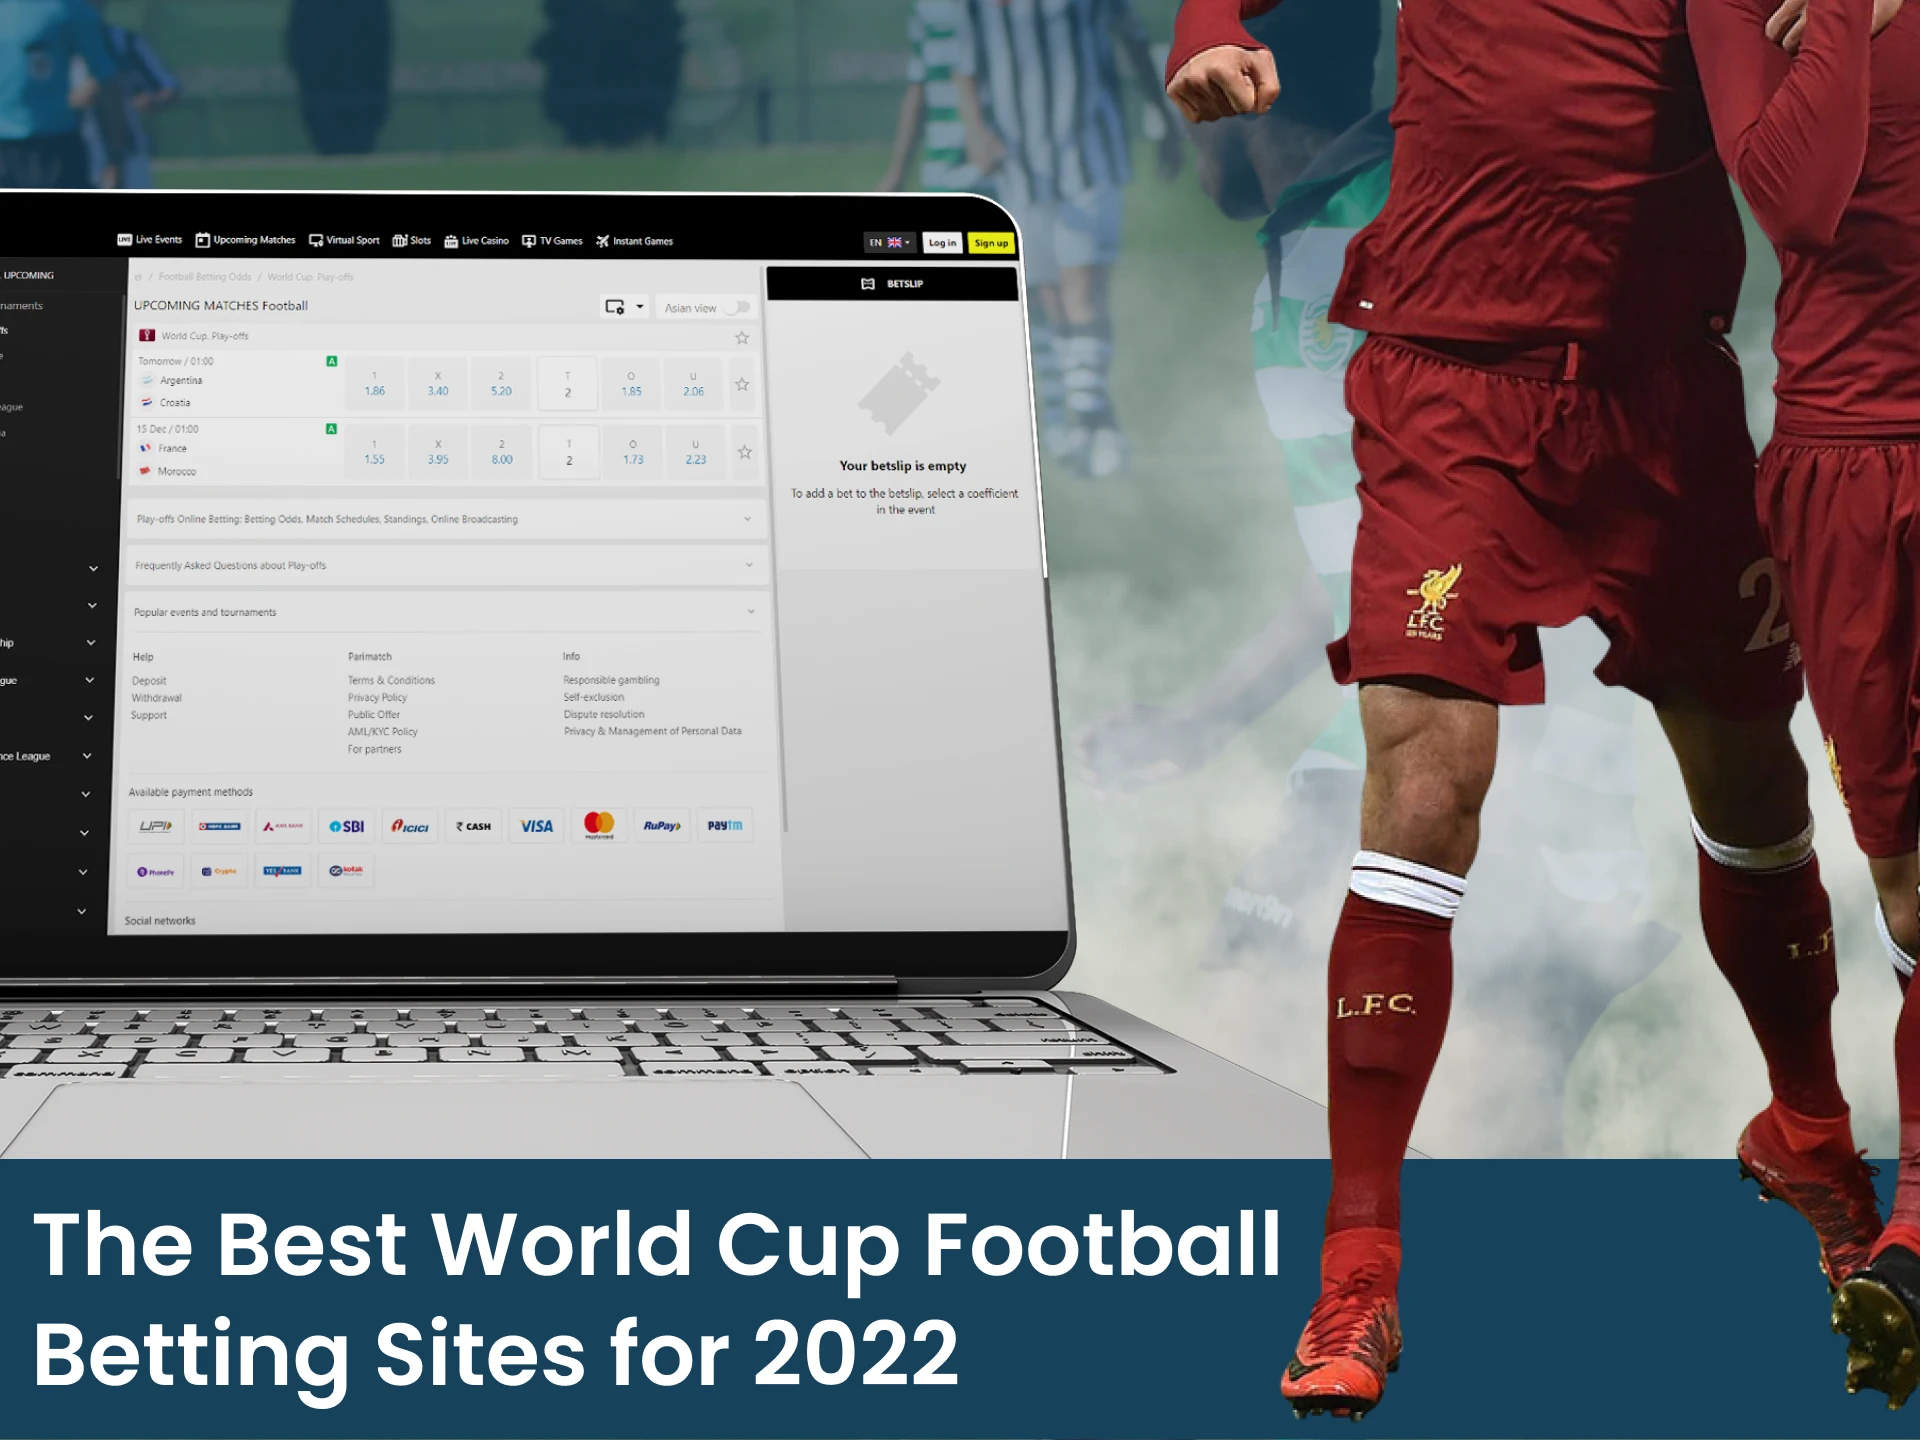 Watch the list of the best sites for football betting during the World Cup.